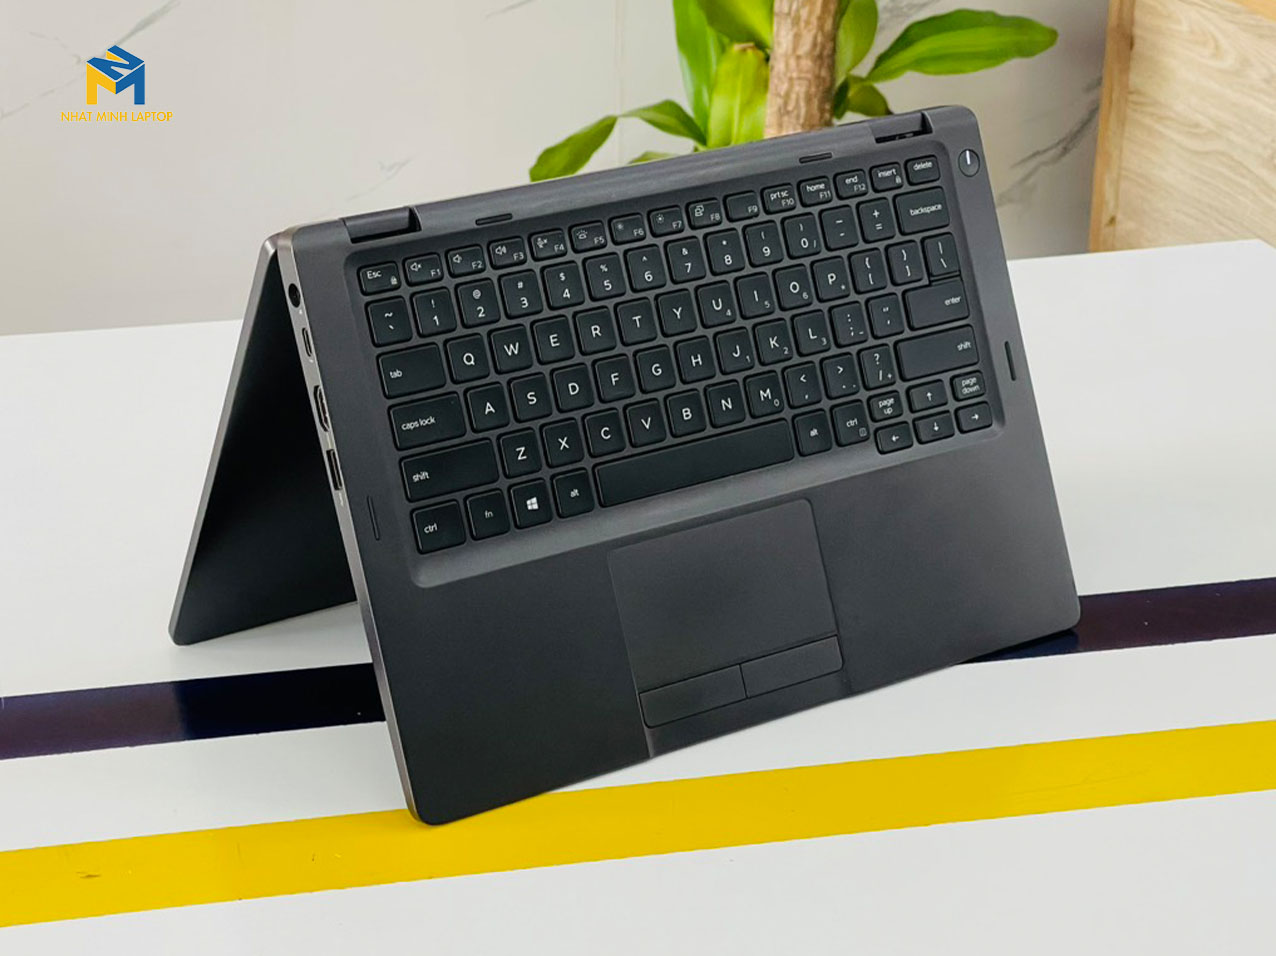 dell latitude 5300 2-in-1 giá rẻ